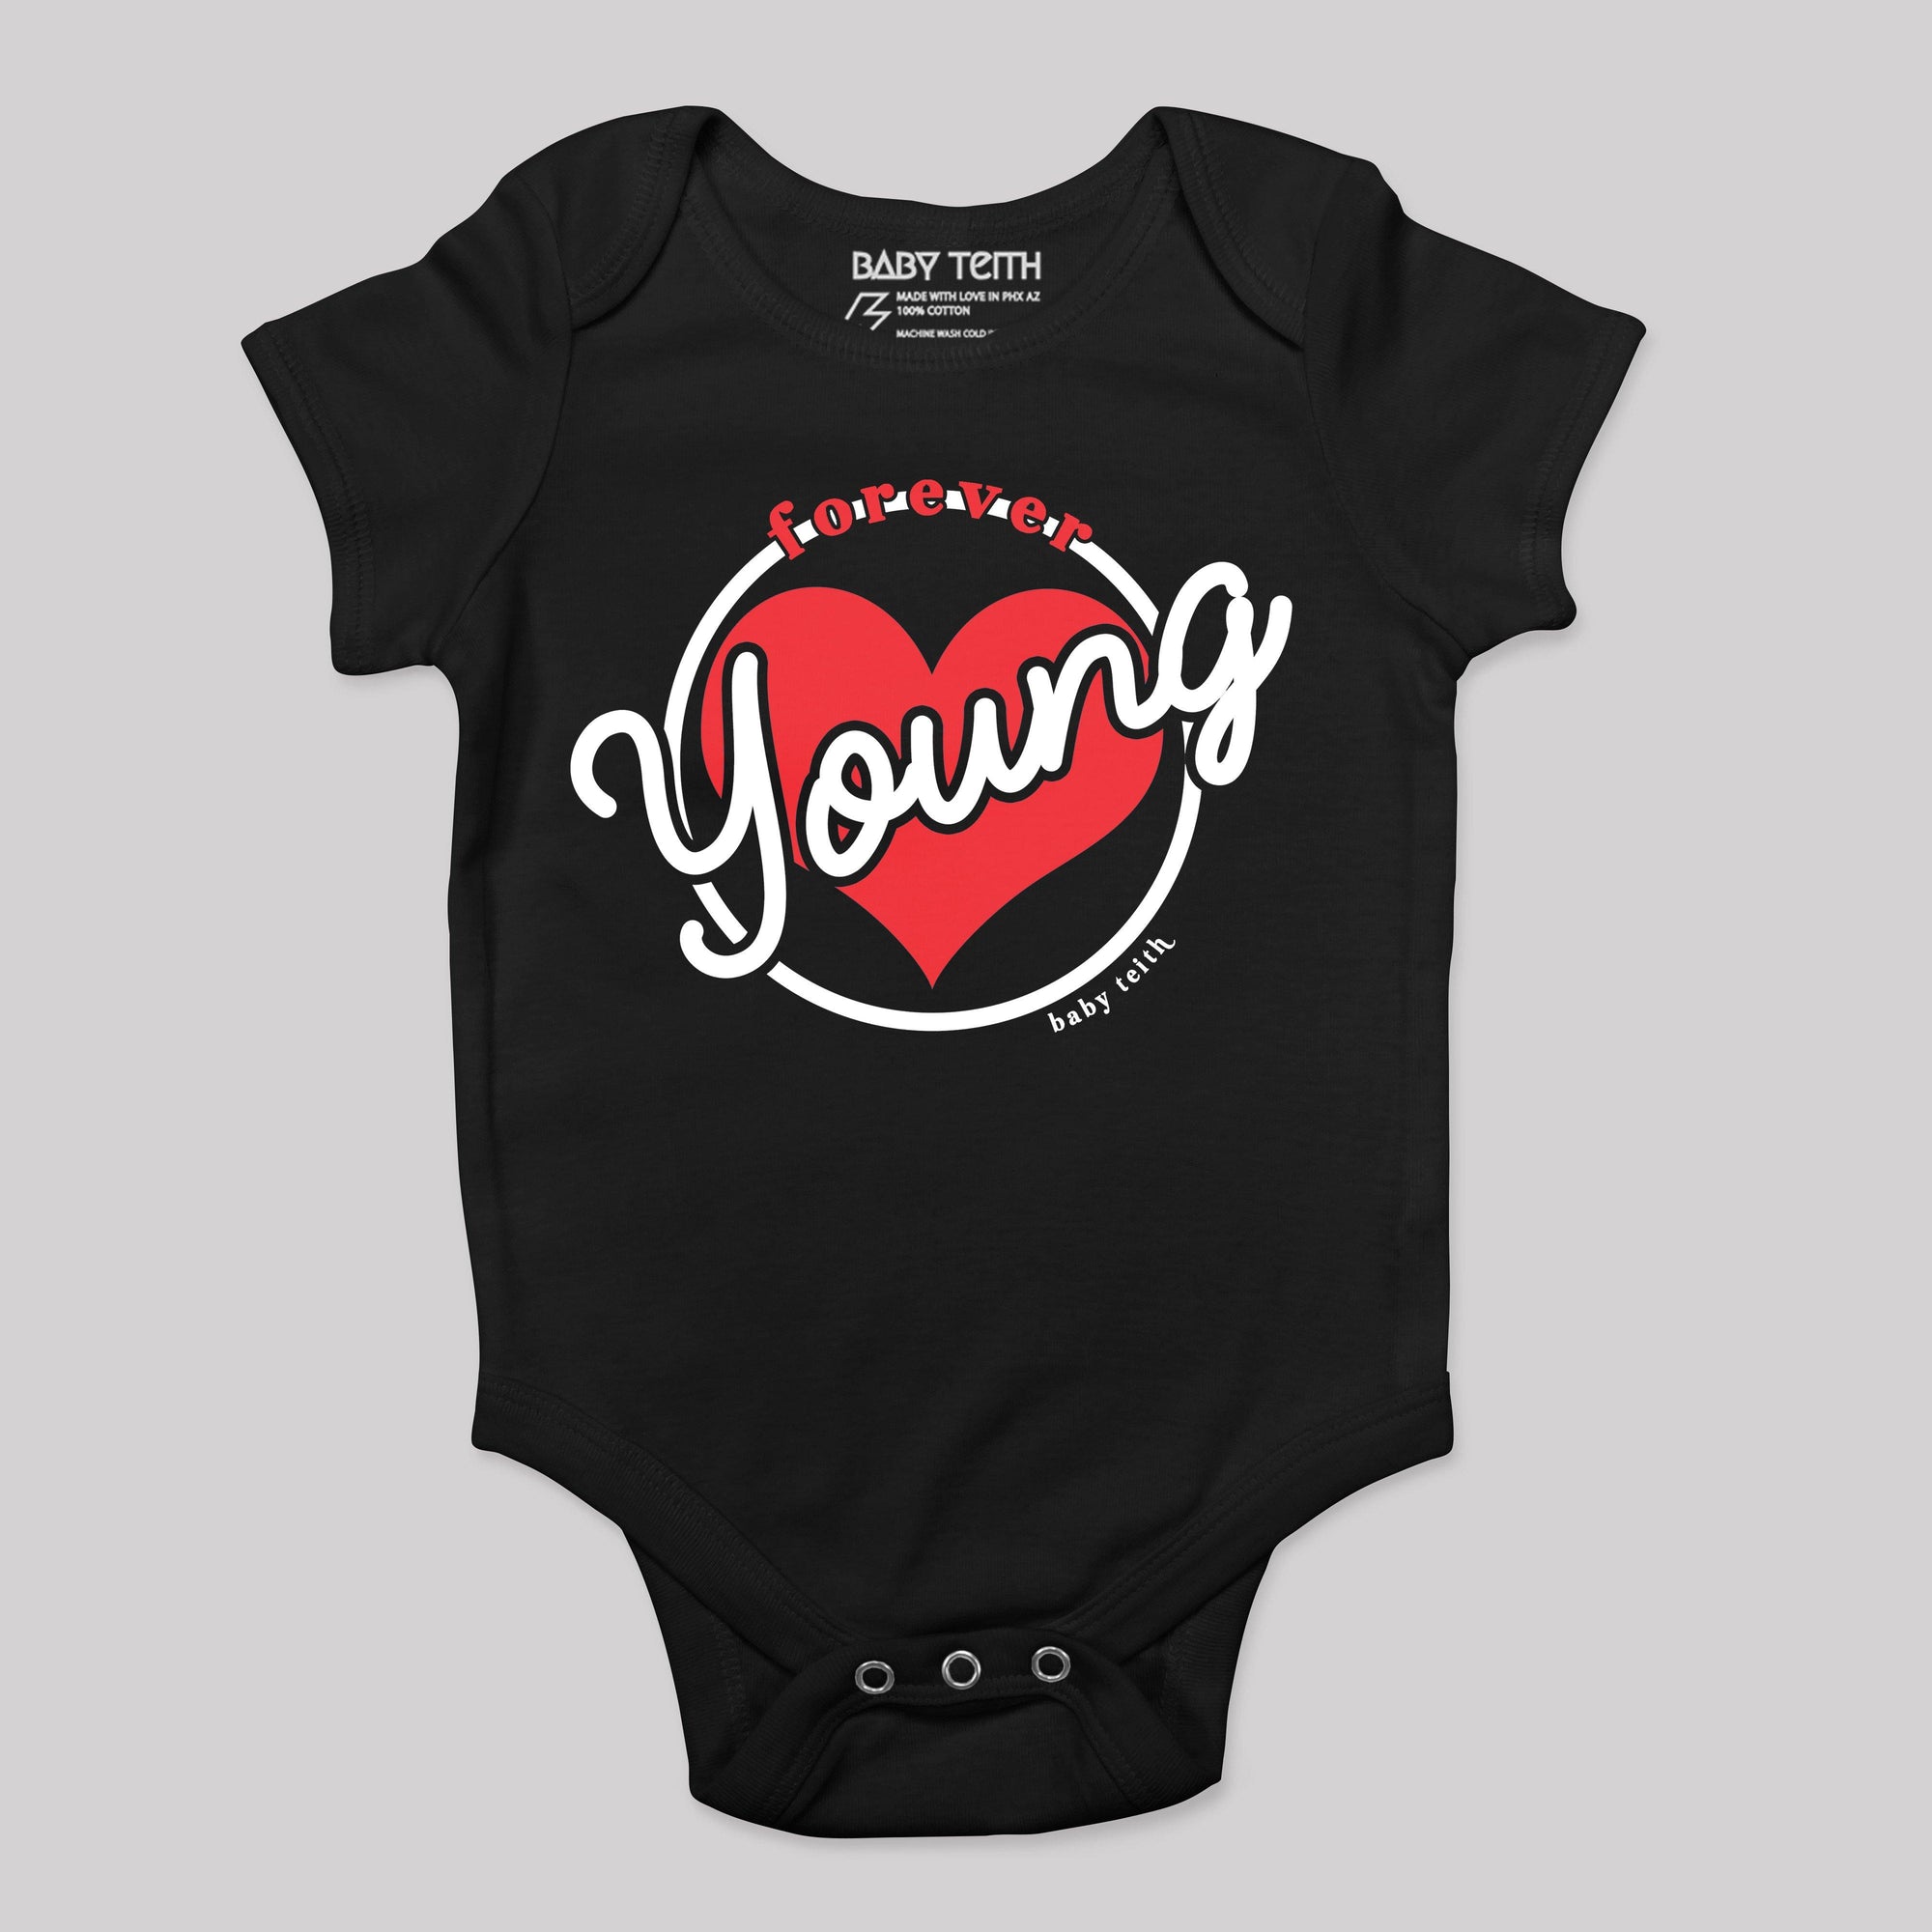 &quot;Forever Young&quot; Bodysuit for Babies - Baby Teith